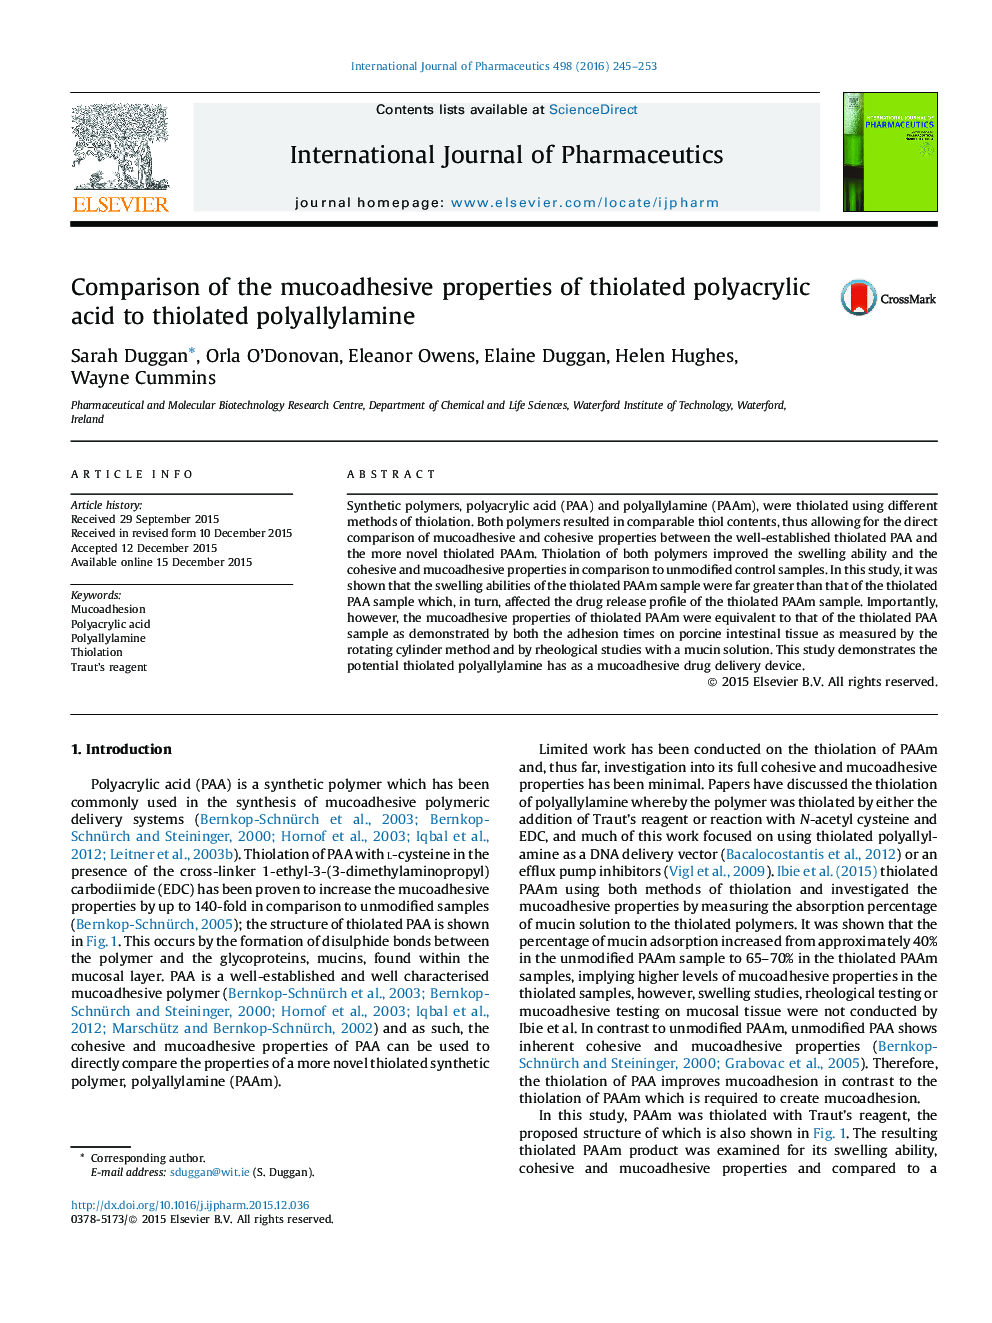 Comparison of the mucoadhesive properties of thiolated polyacrylic acid to thiolated polyallylamine